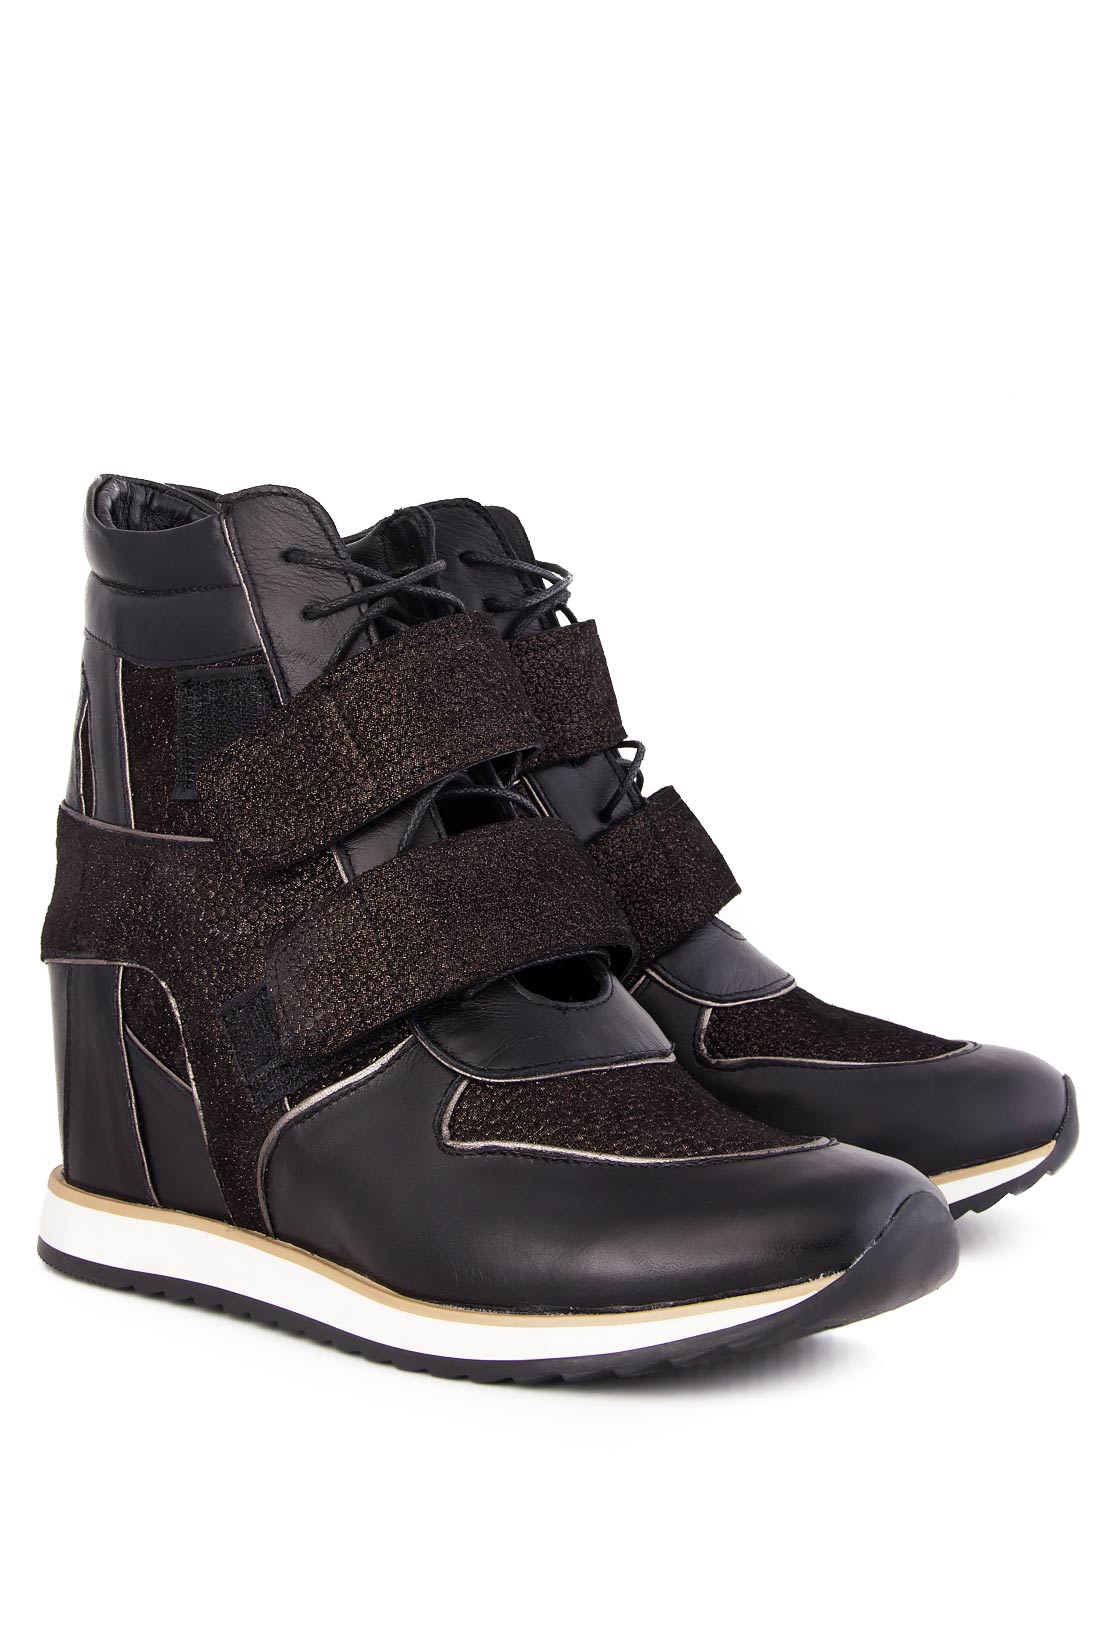 Suede and leather wedge sneakers Ana Kaloni image 1